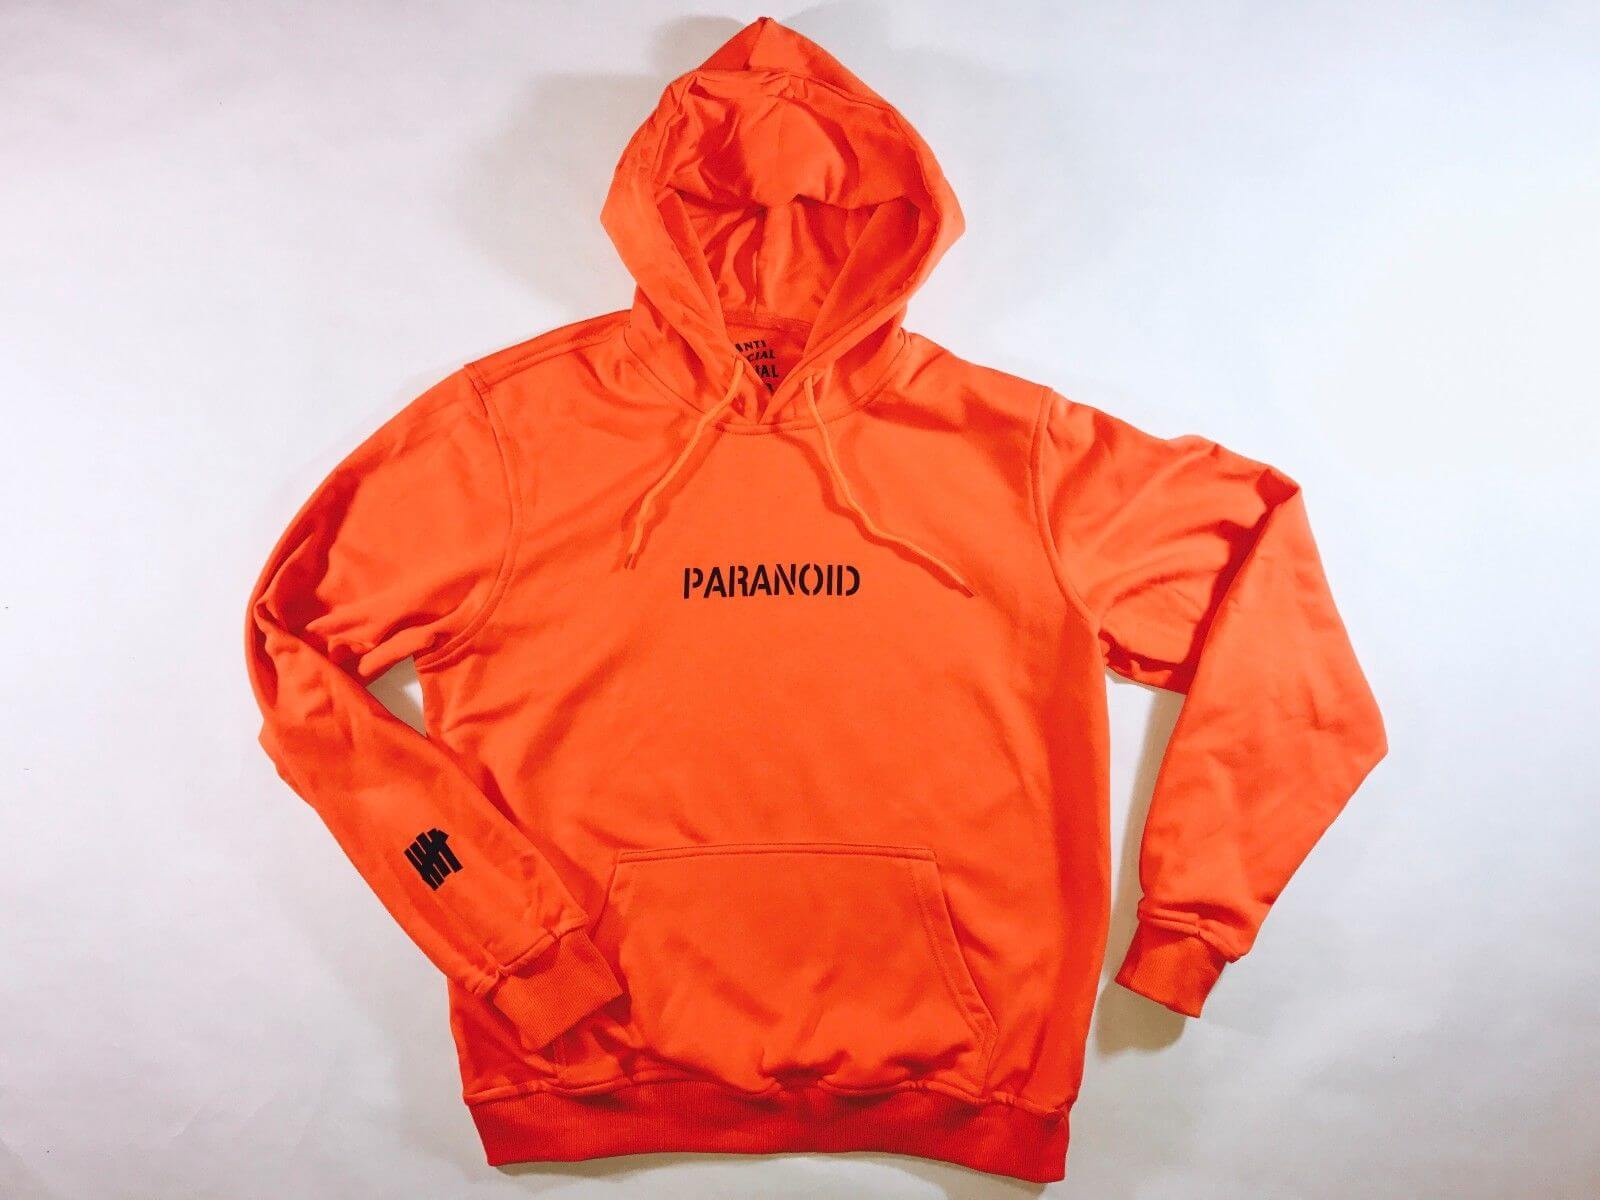 Anti Social Social Club x Undefeated ‘Paranoid’ Hoodie M – HypeTrader.com